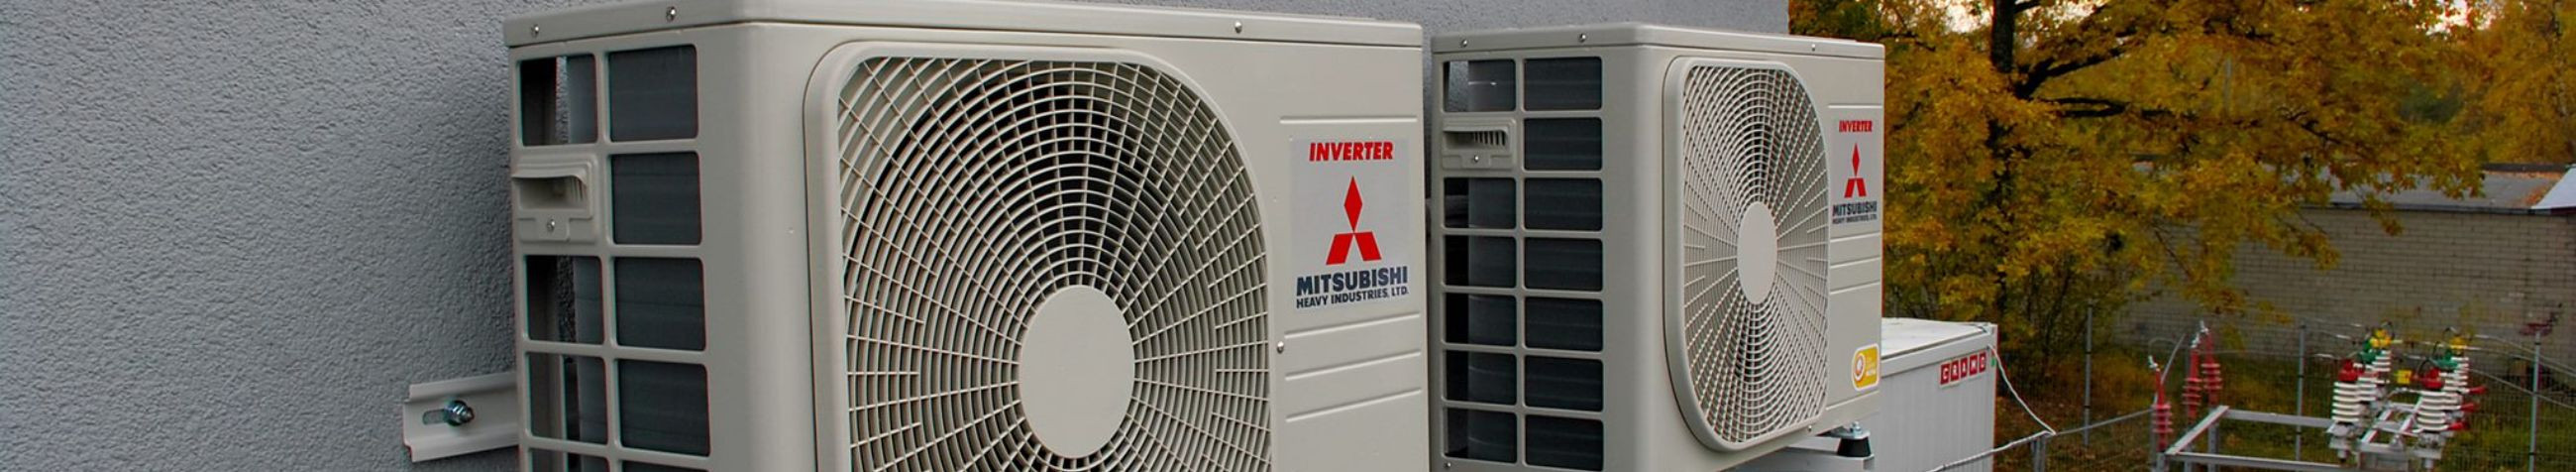 Electronics Industry, air conditioners, heating, heating solutions, Equipment and machinery, cooling and air conditioning systems, heat pumps, Cooling equipment, air conditioning systems, climate control systems servicing, climate control equipment sales